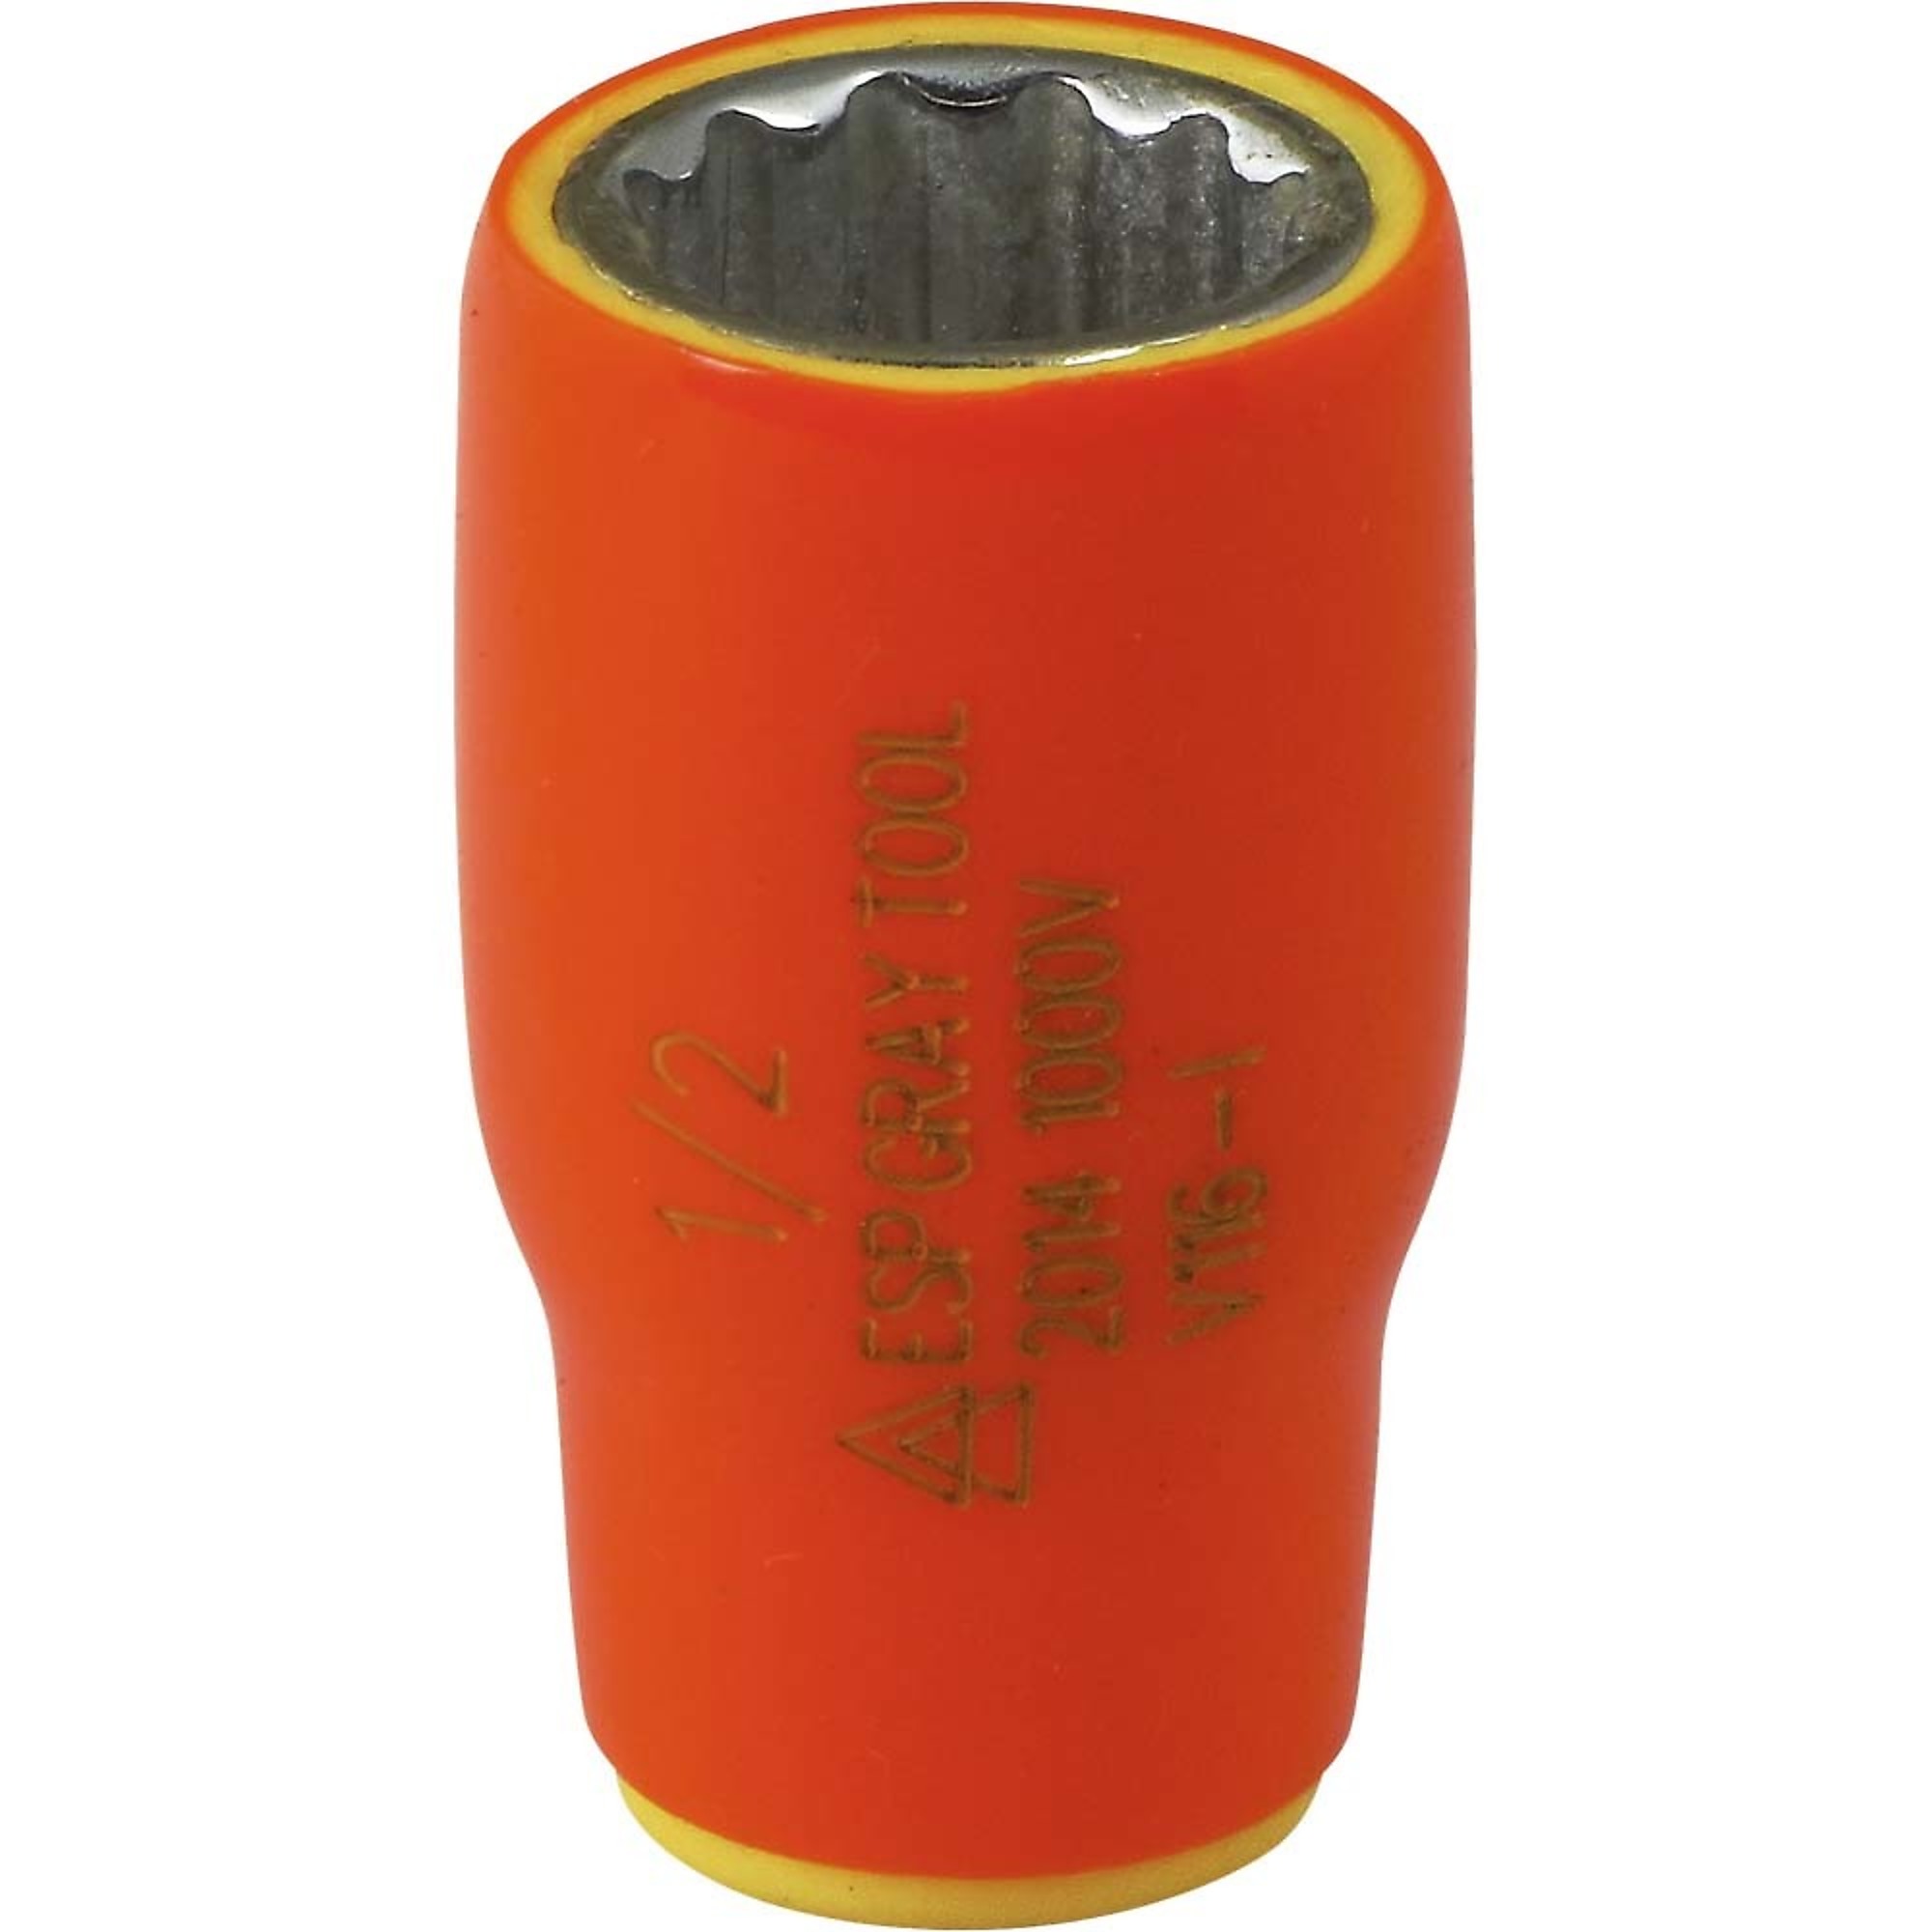 Gray Tools, 1/2Inch X 1/4Inch Drive Socket 1000V Insulated, Socket Size 1/2 in, Drive Size 1/4 in, Model V116-I